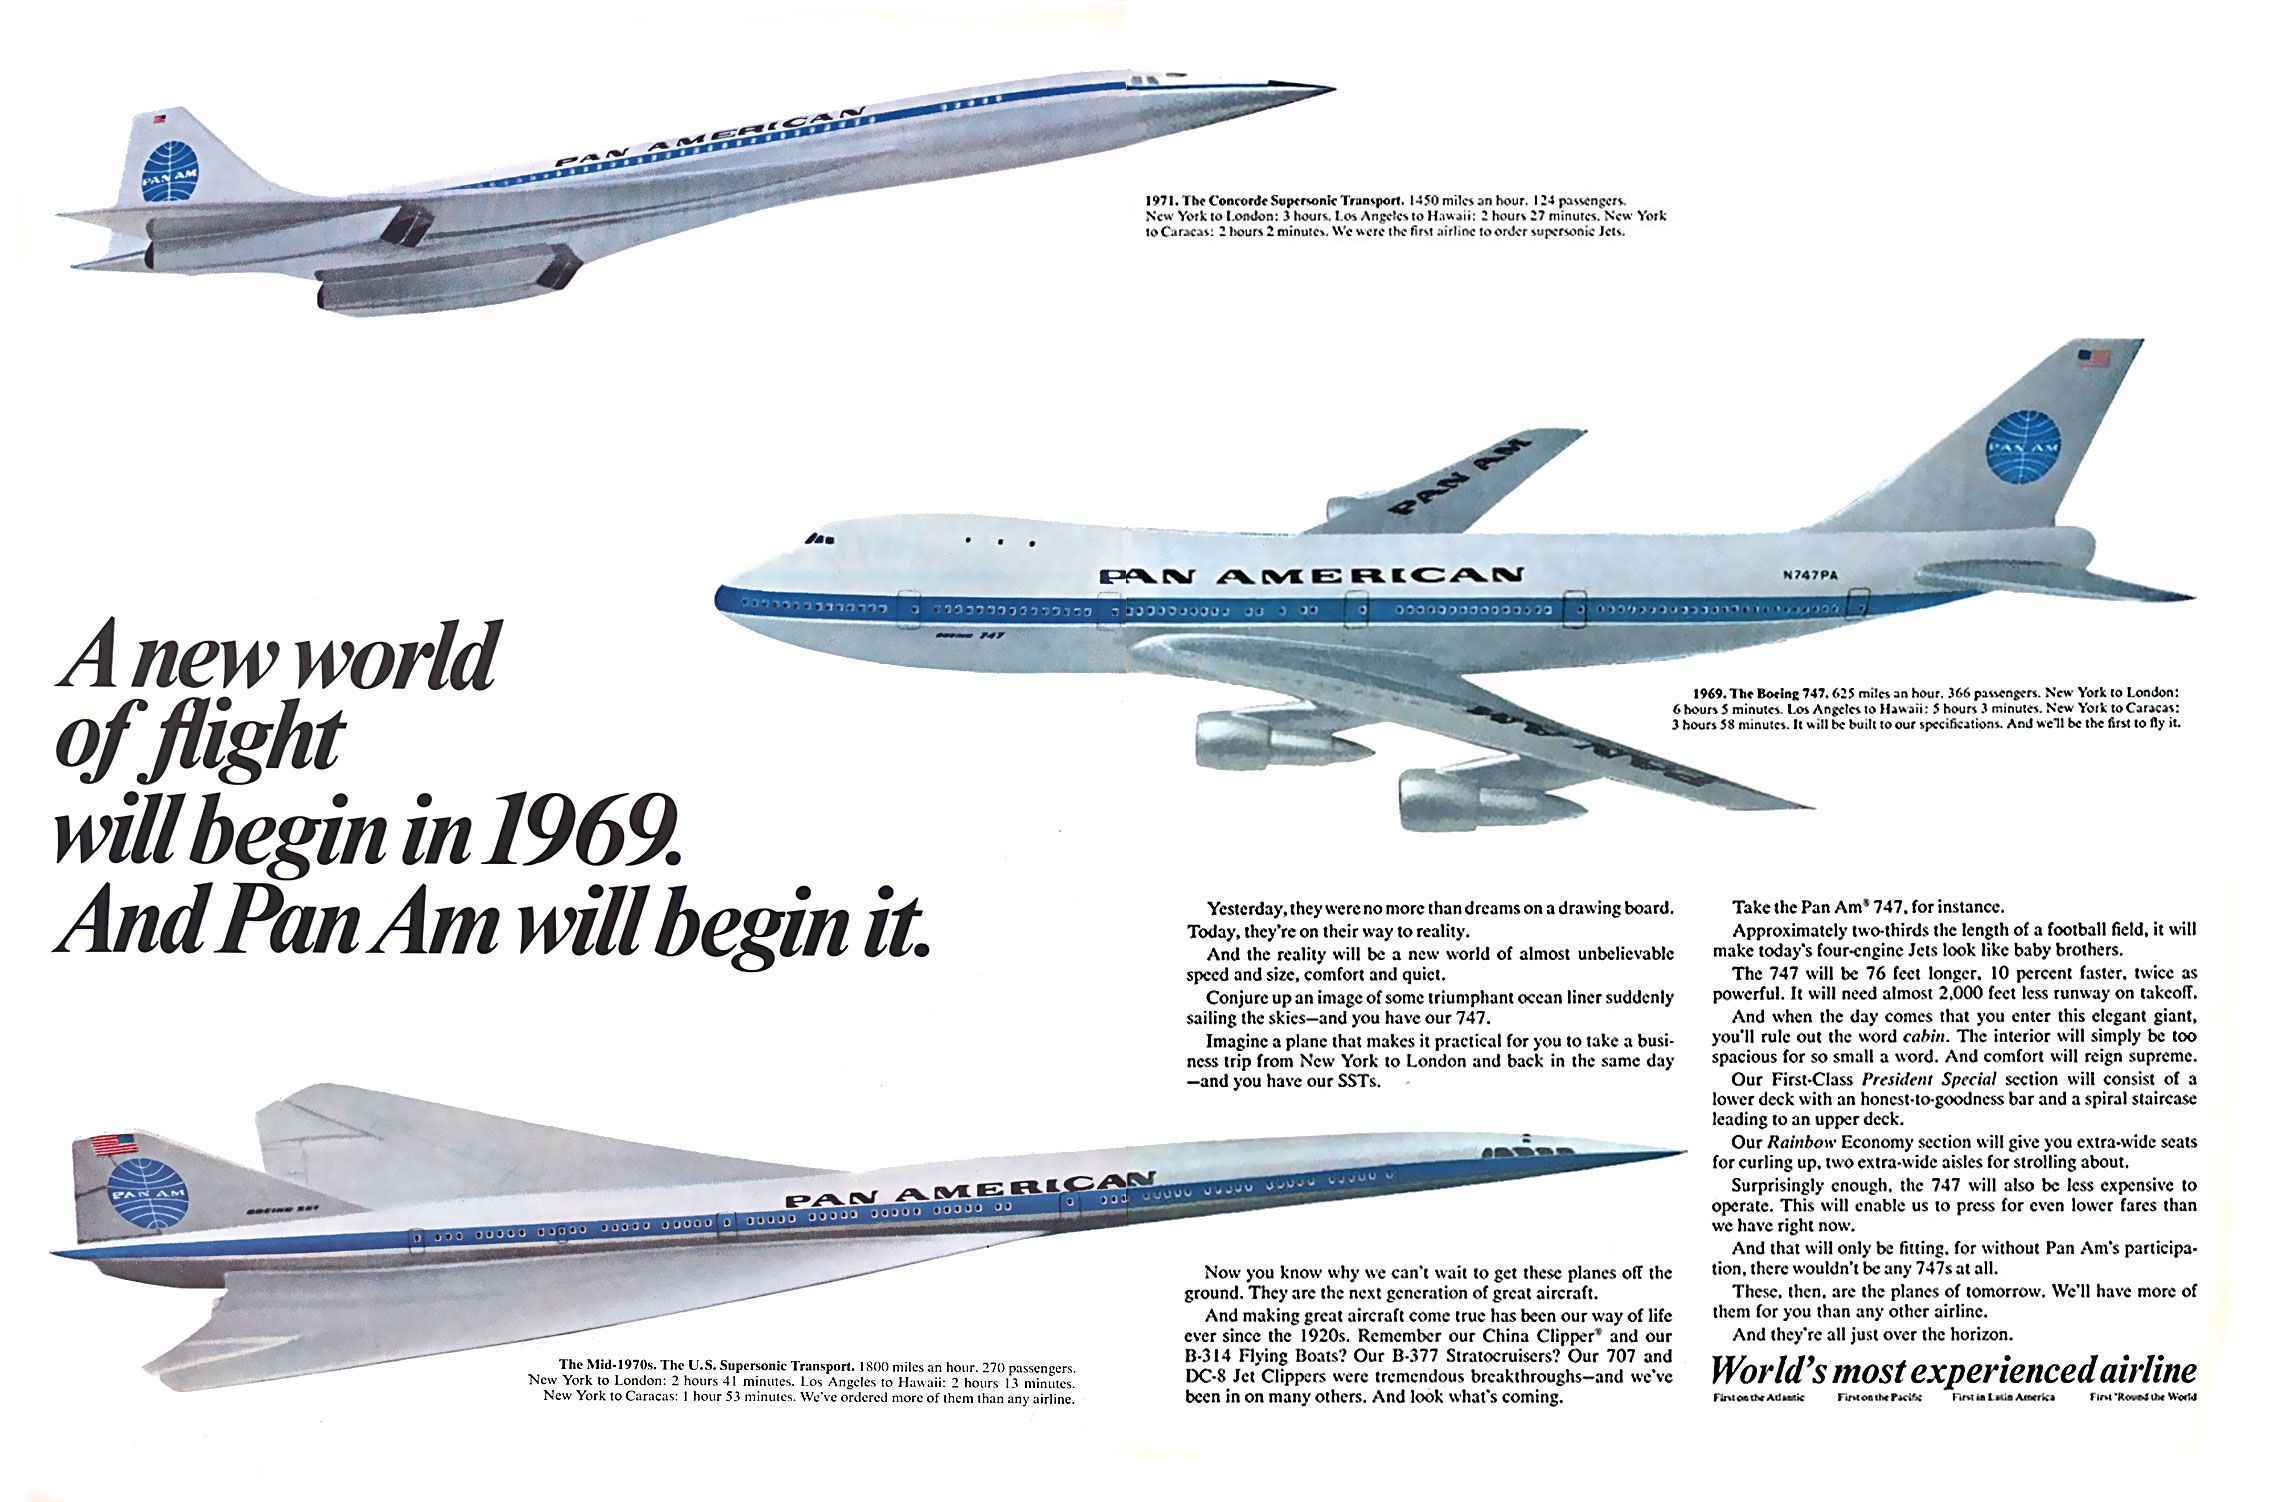 A news article showing a Pan Am Boeing 747 and Concorde.